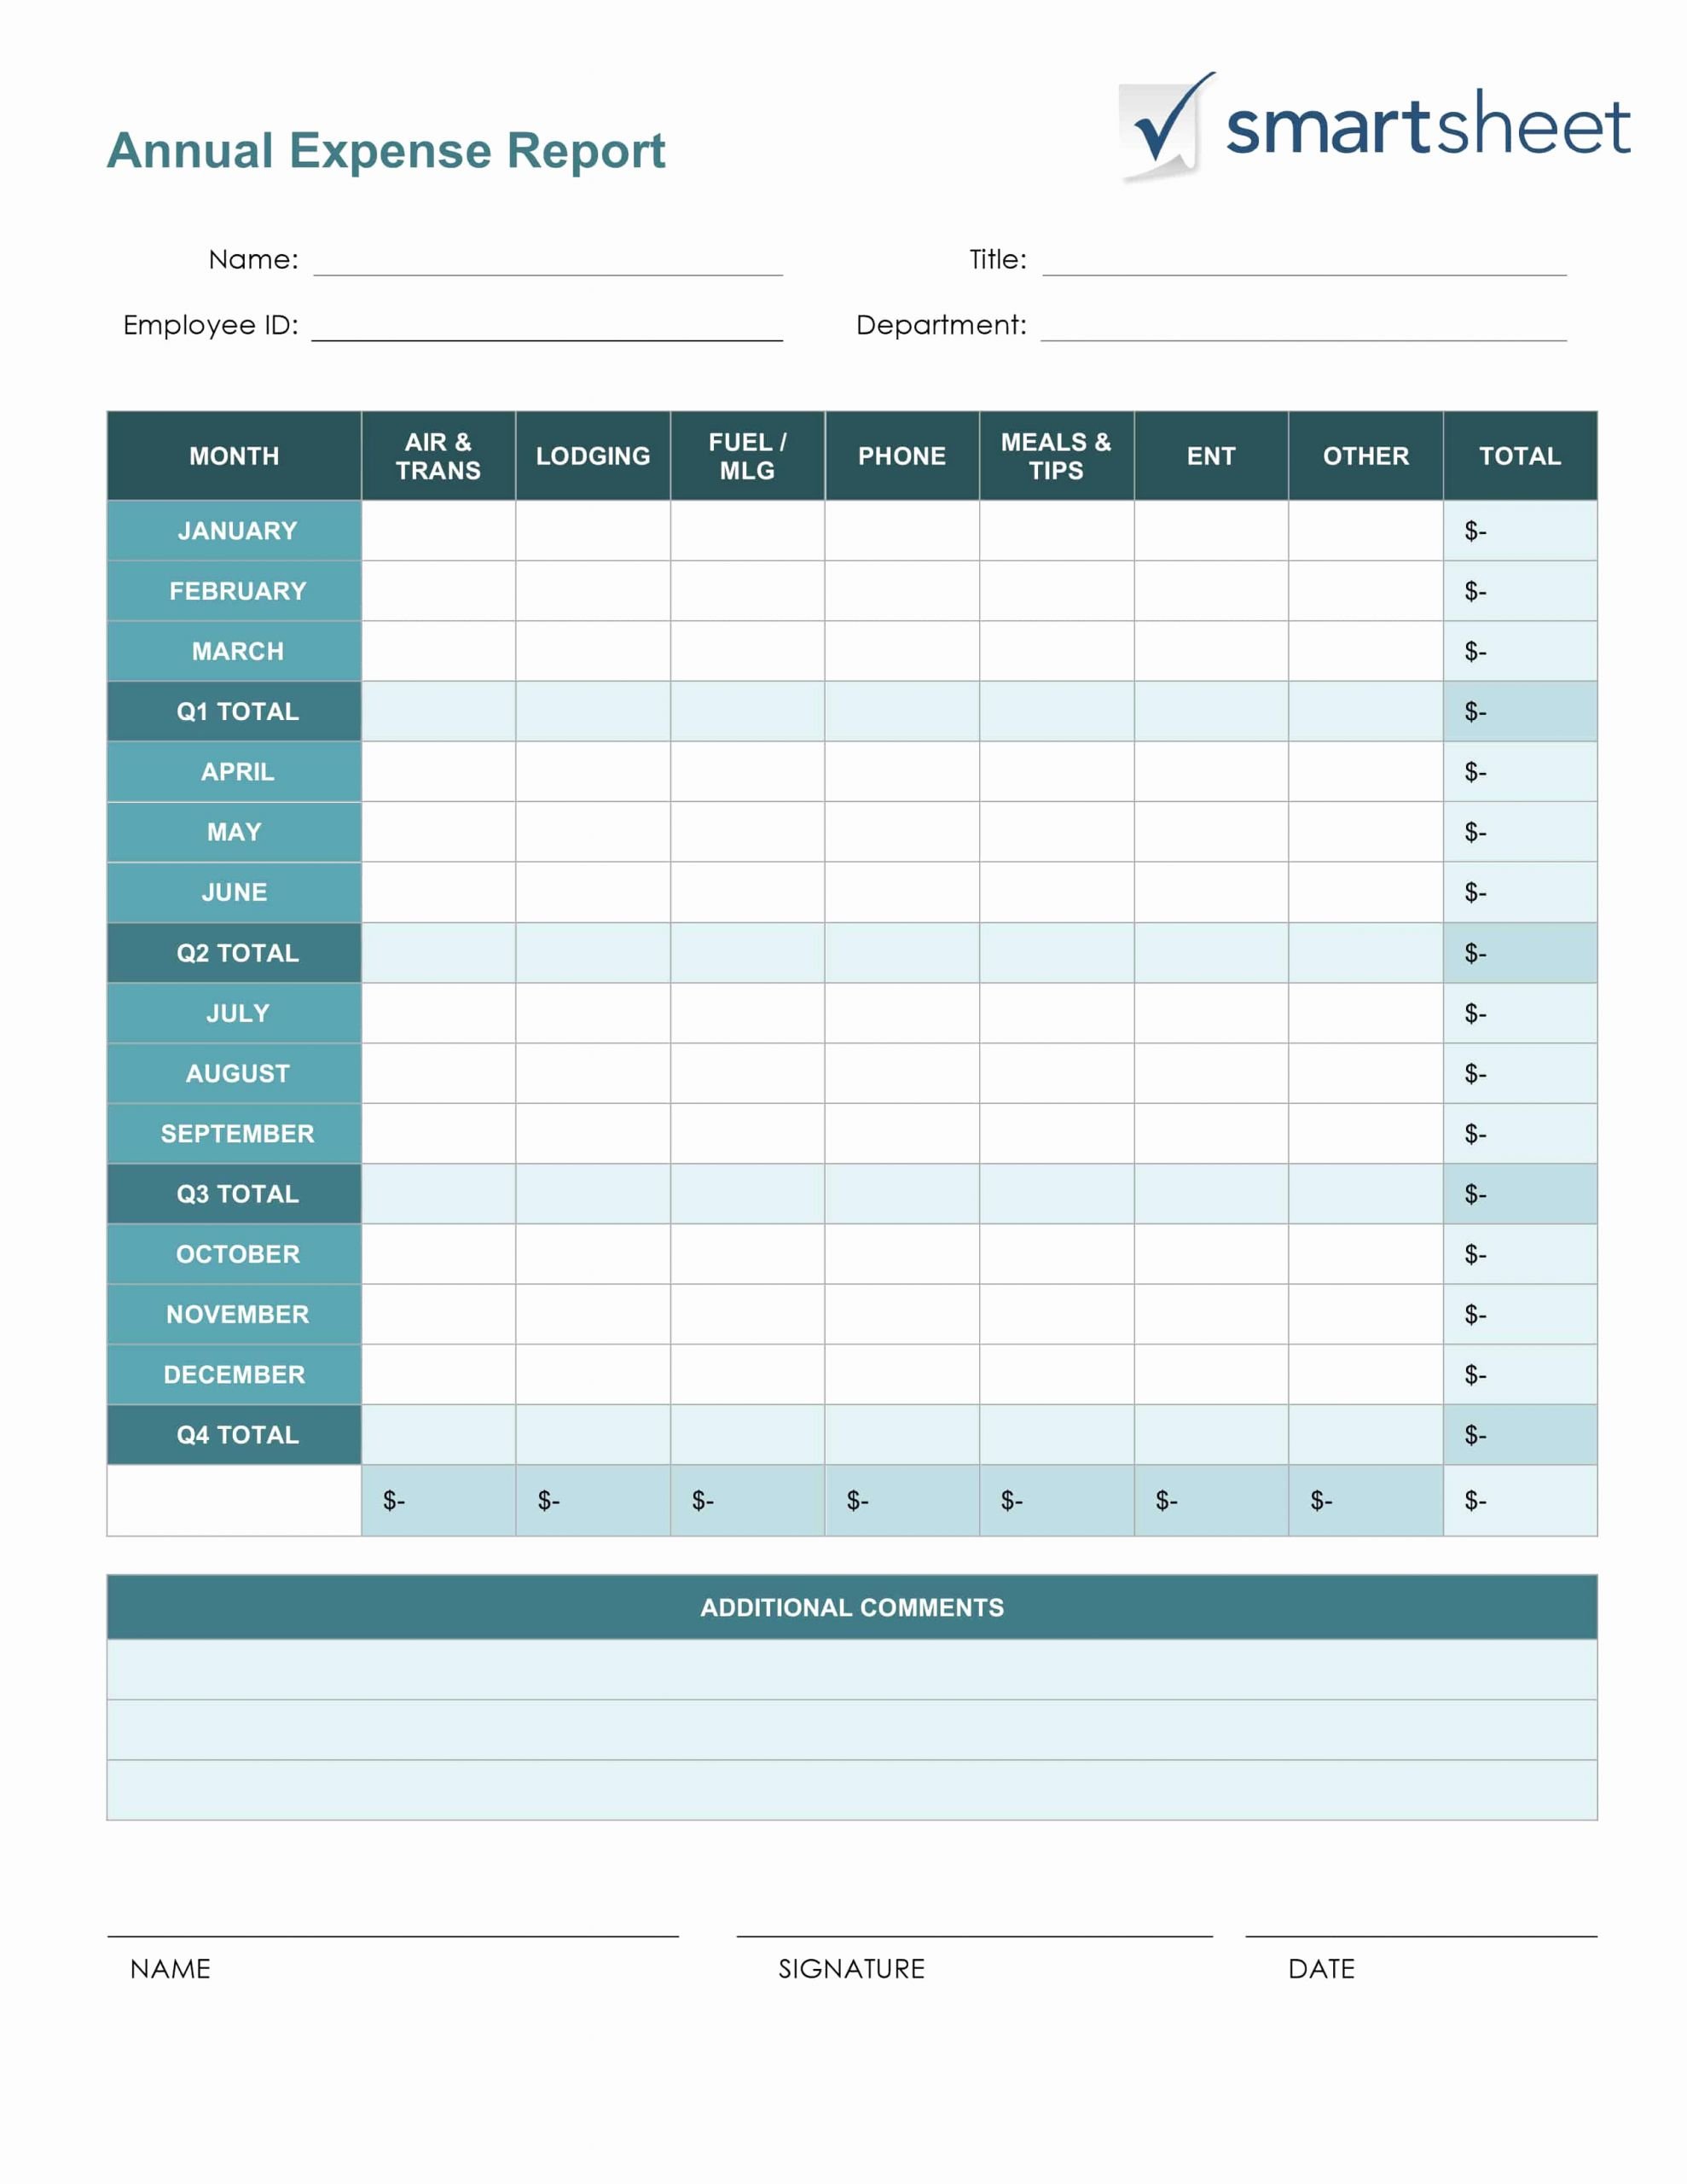 Free Expense form Template New Free Expense Report Templates Smartsheet